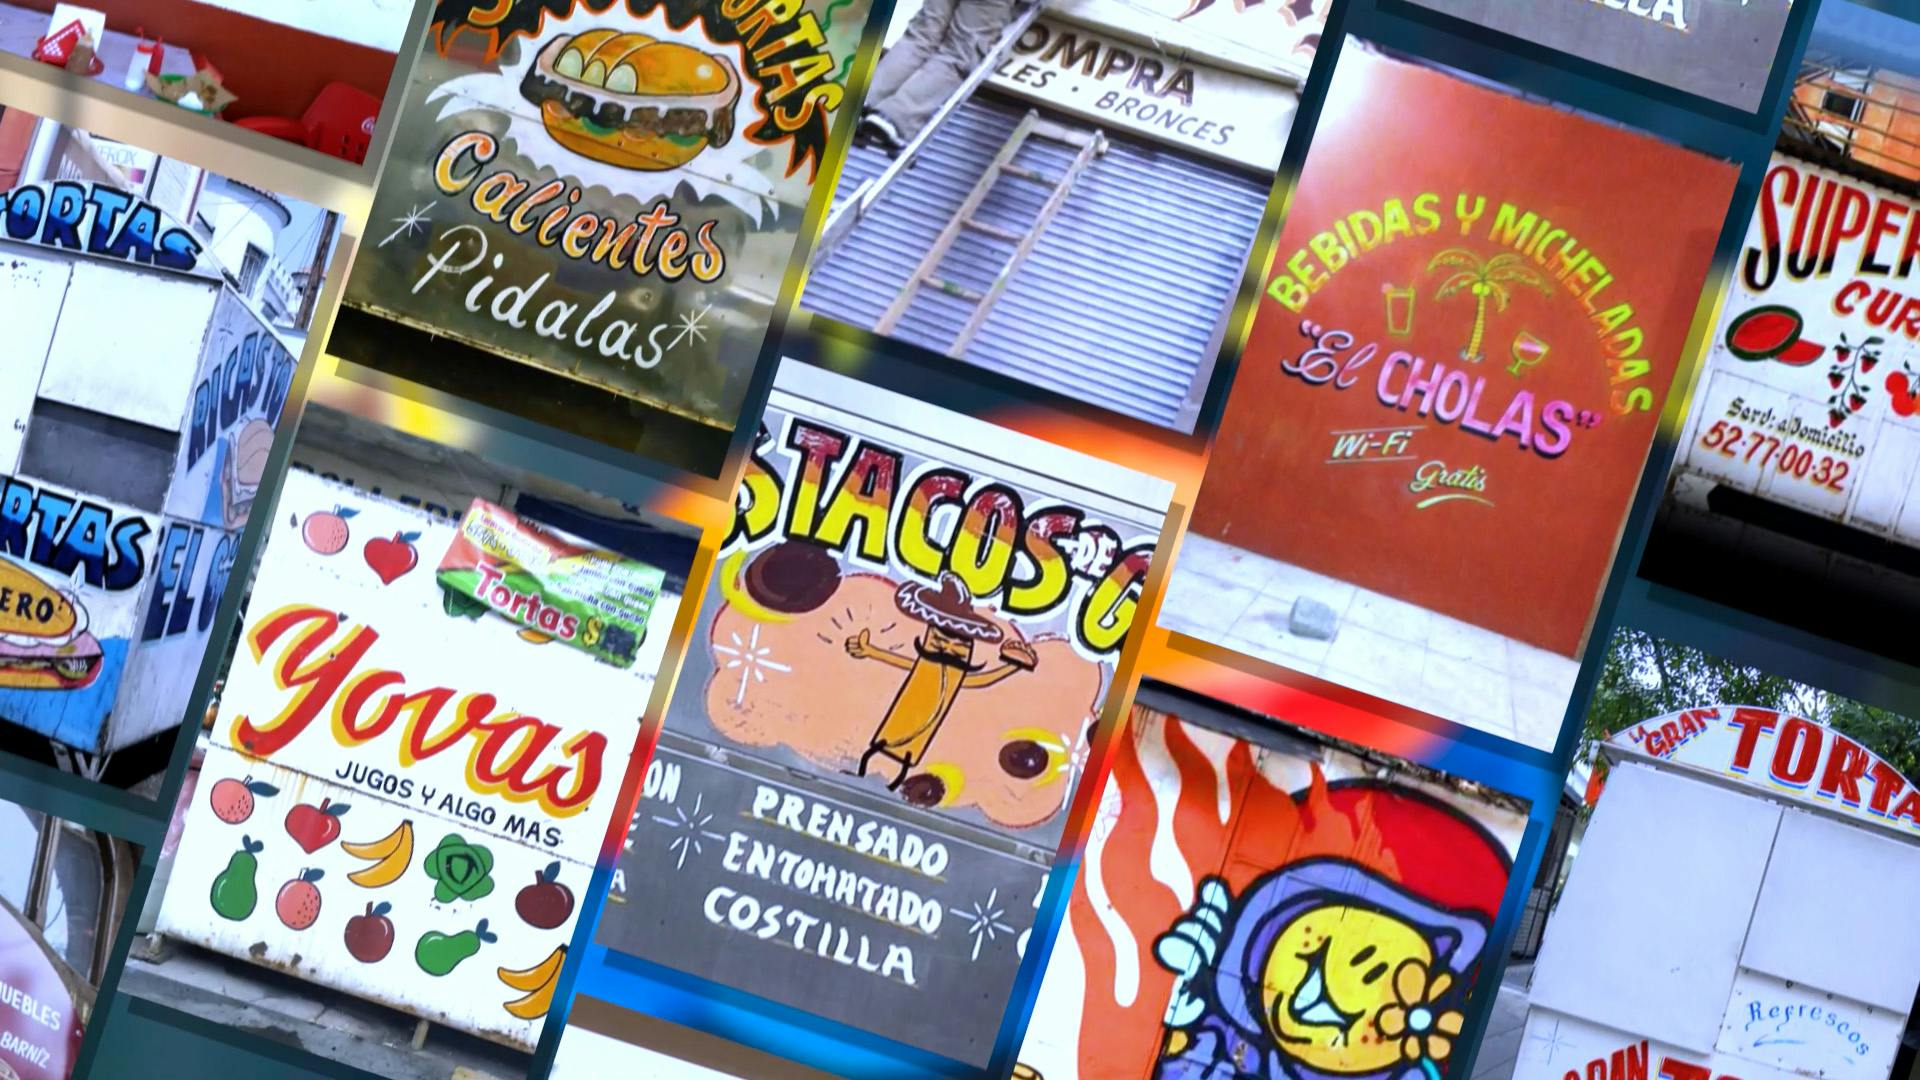 Image shows a collection of colourful hand-painted signage from Mexico City